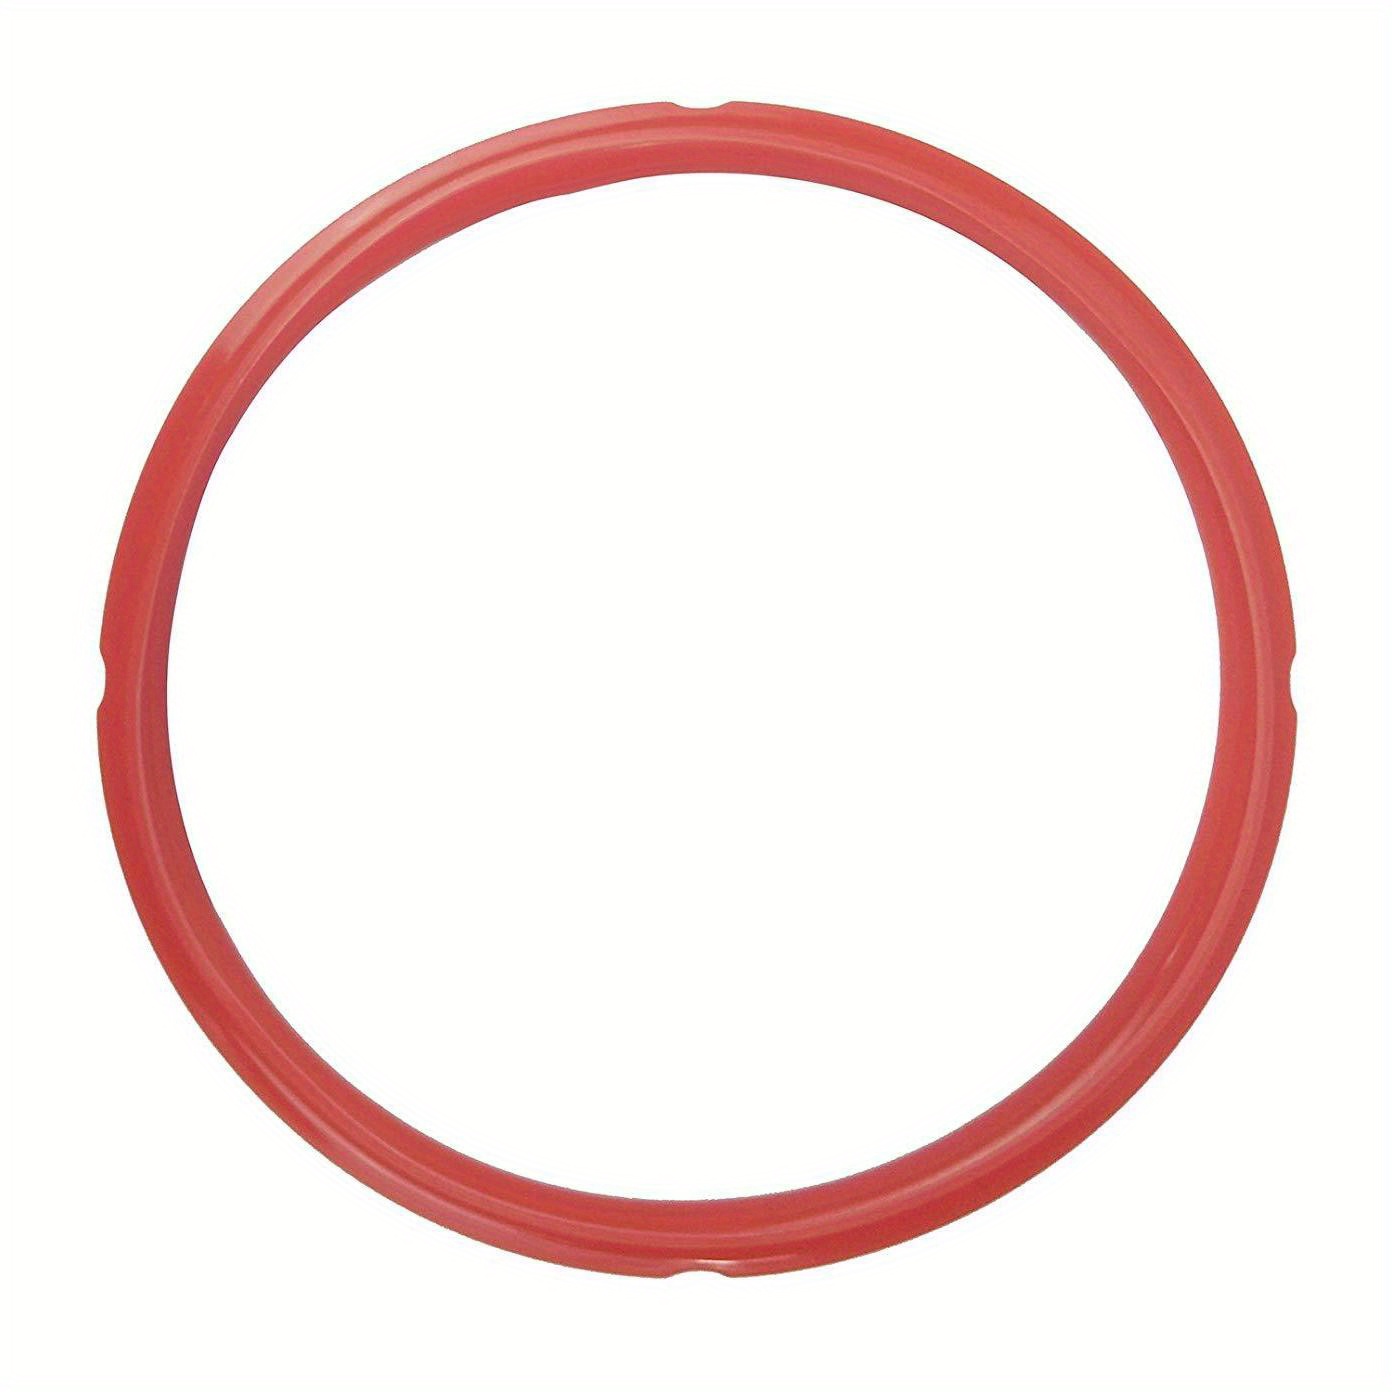 COSCOD Sealing Ring for 6 Qt Instant pot Replacement Silicone Gasket Seal  Rings for Instapot 6 Quart 2pcs Sealer Accessories Parts for Insta Pressure